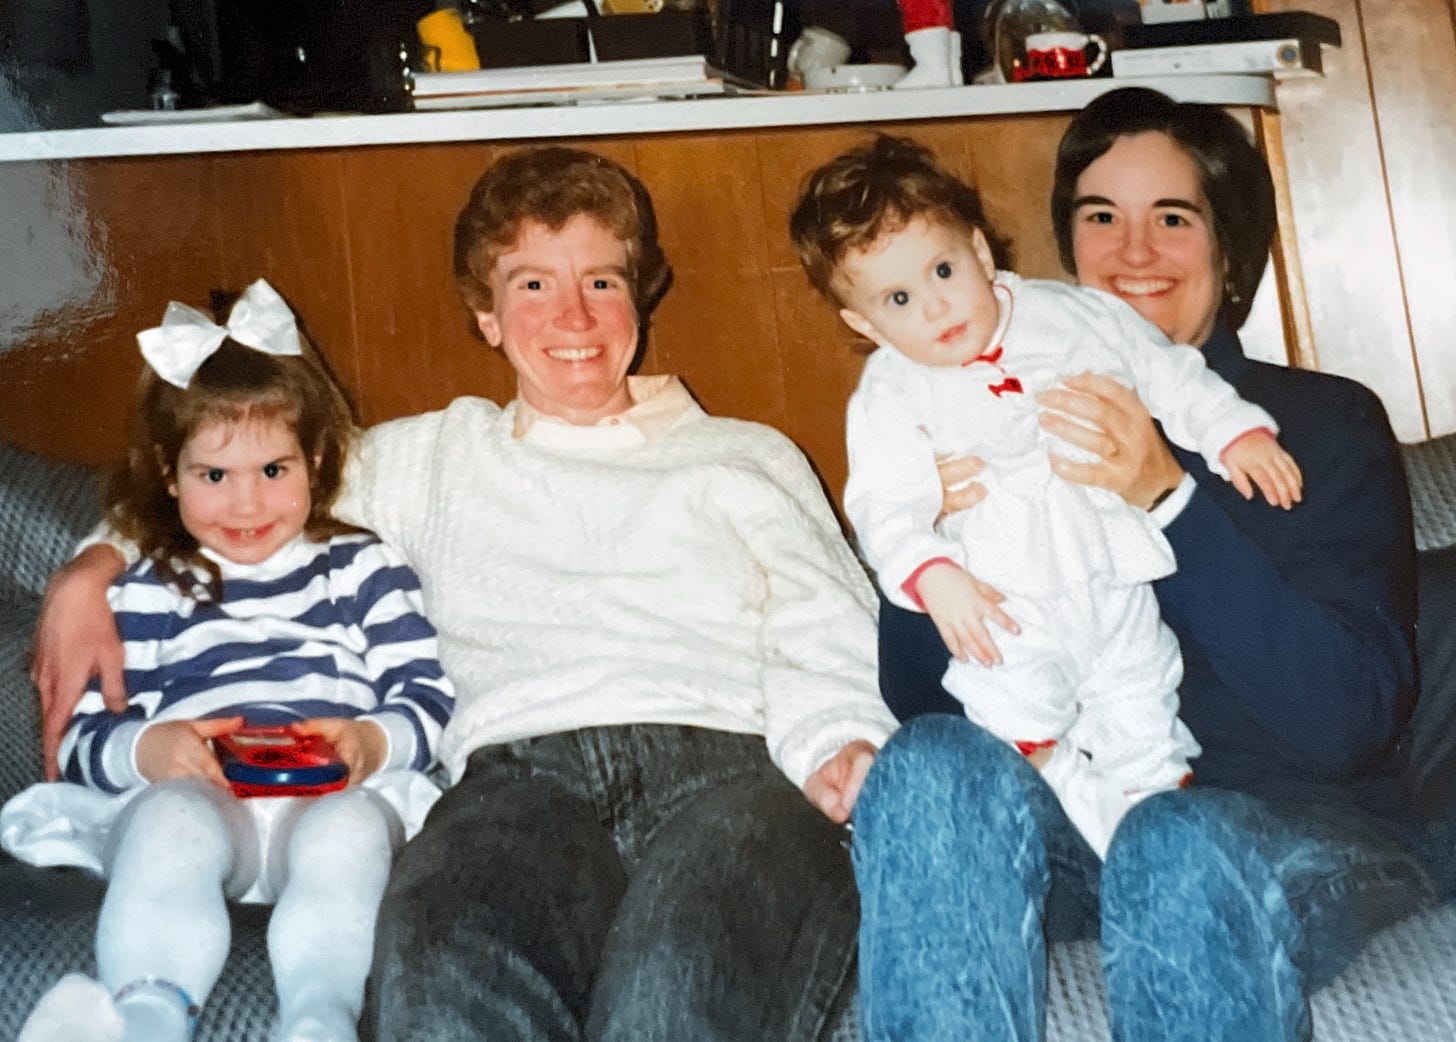 Two children and two adult women sitting on a sofa together